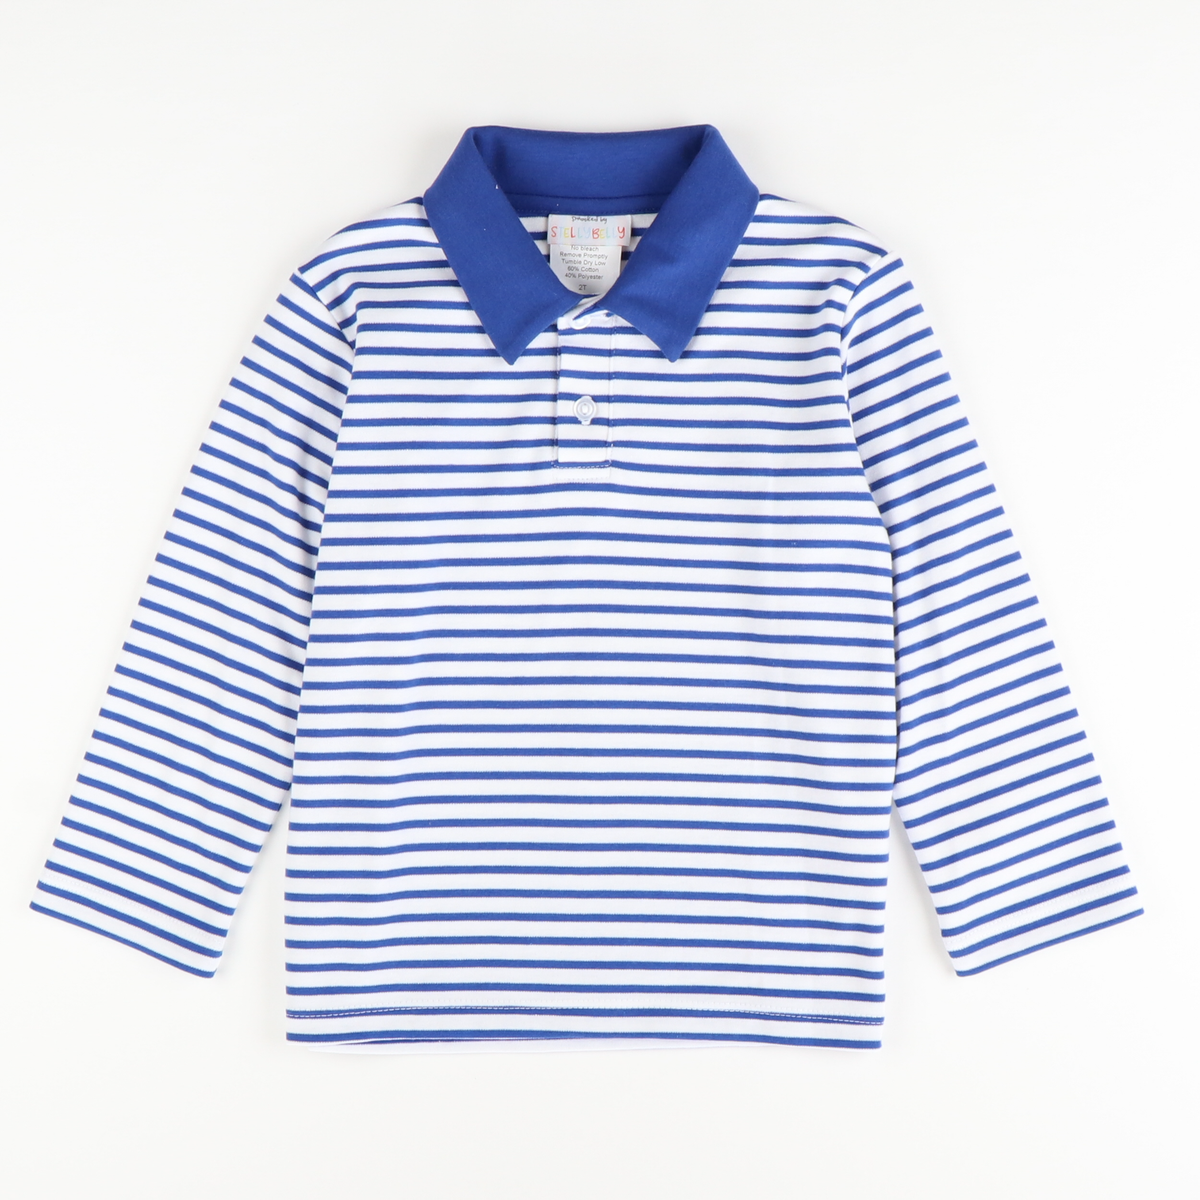 Signature L/S Knit Polo - Royal Blue Stripe - Stellybelly